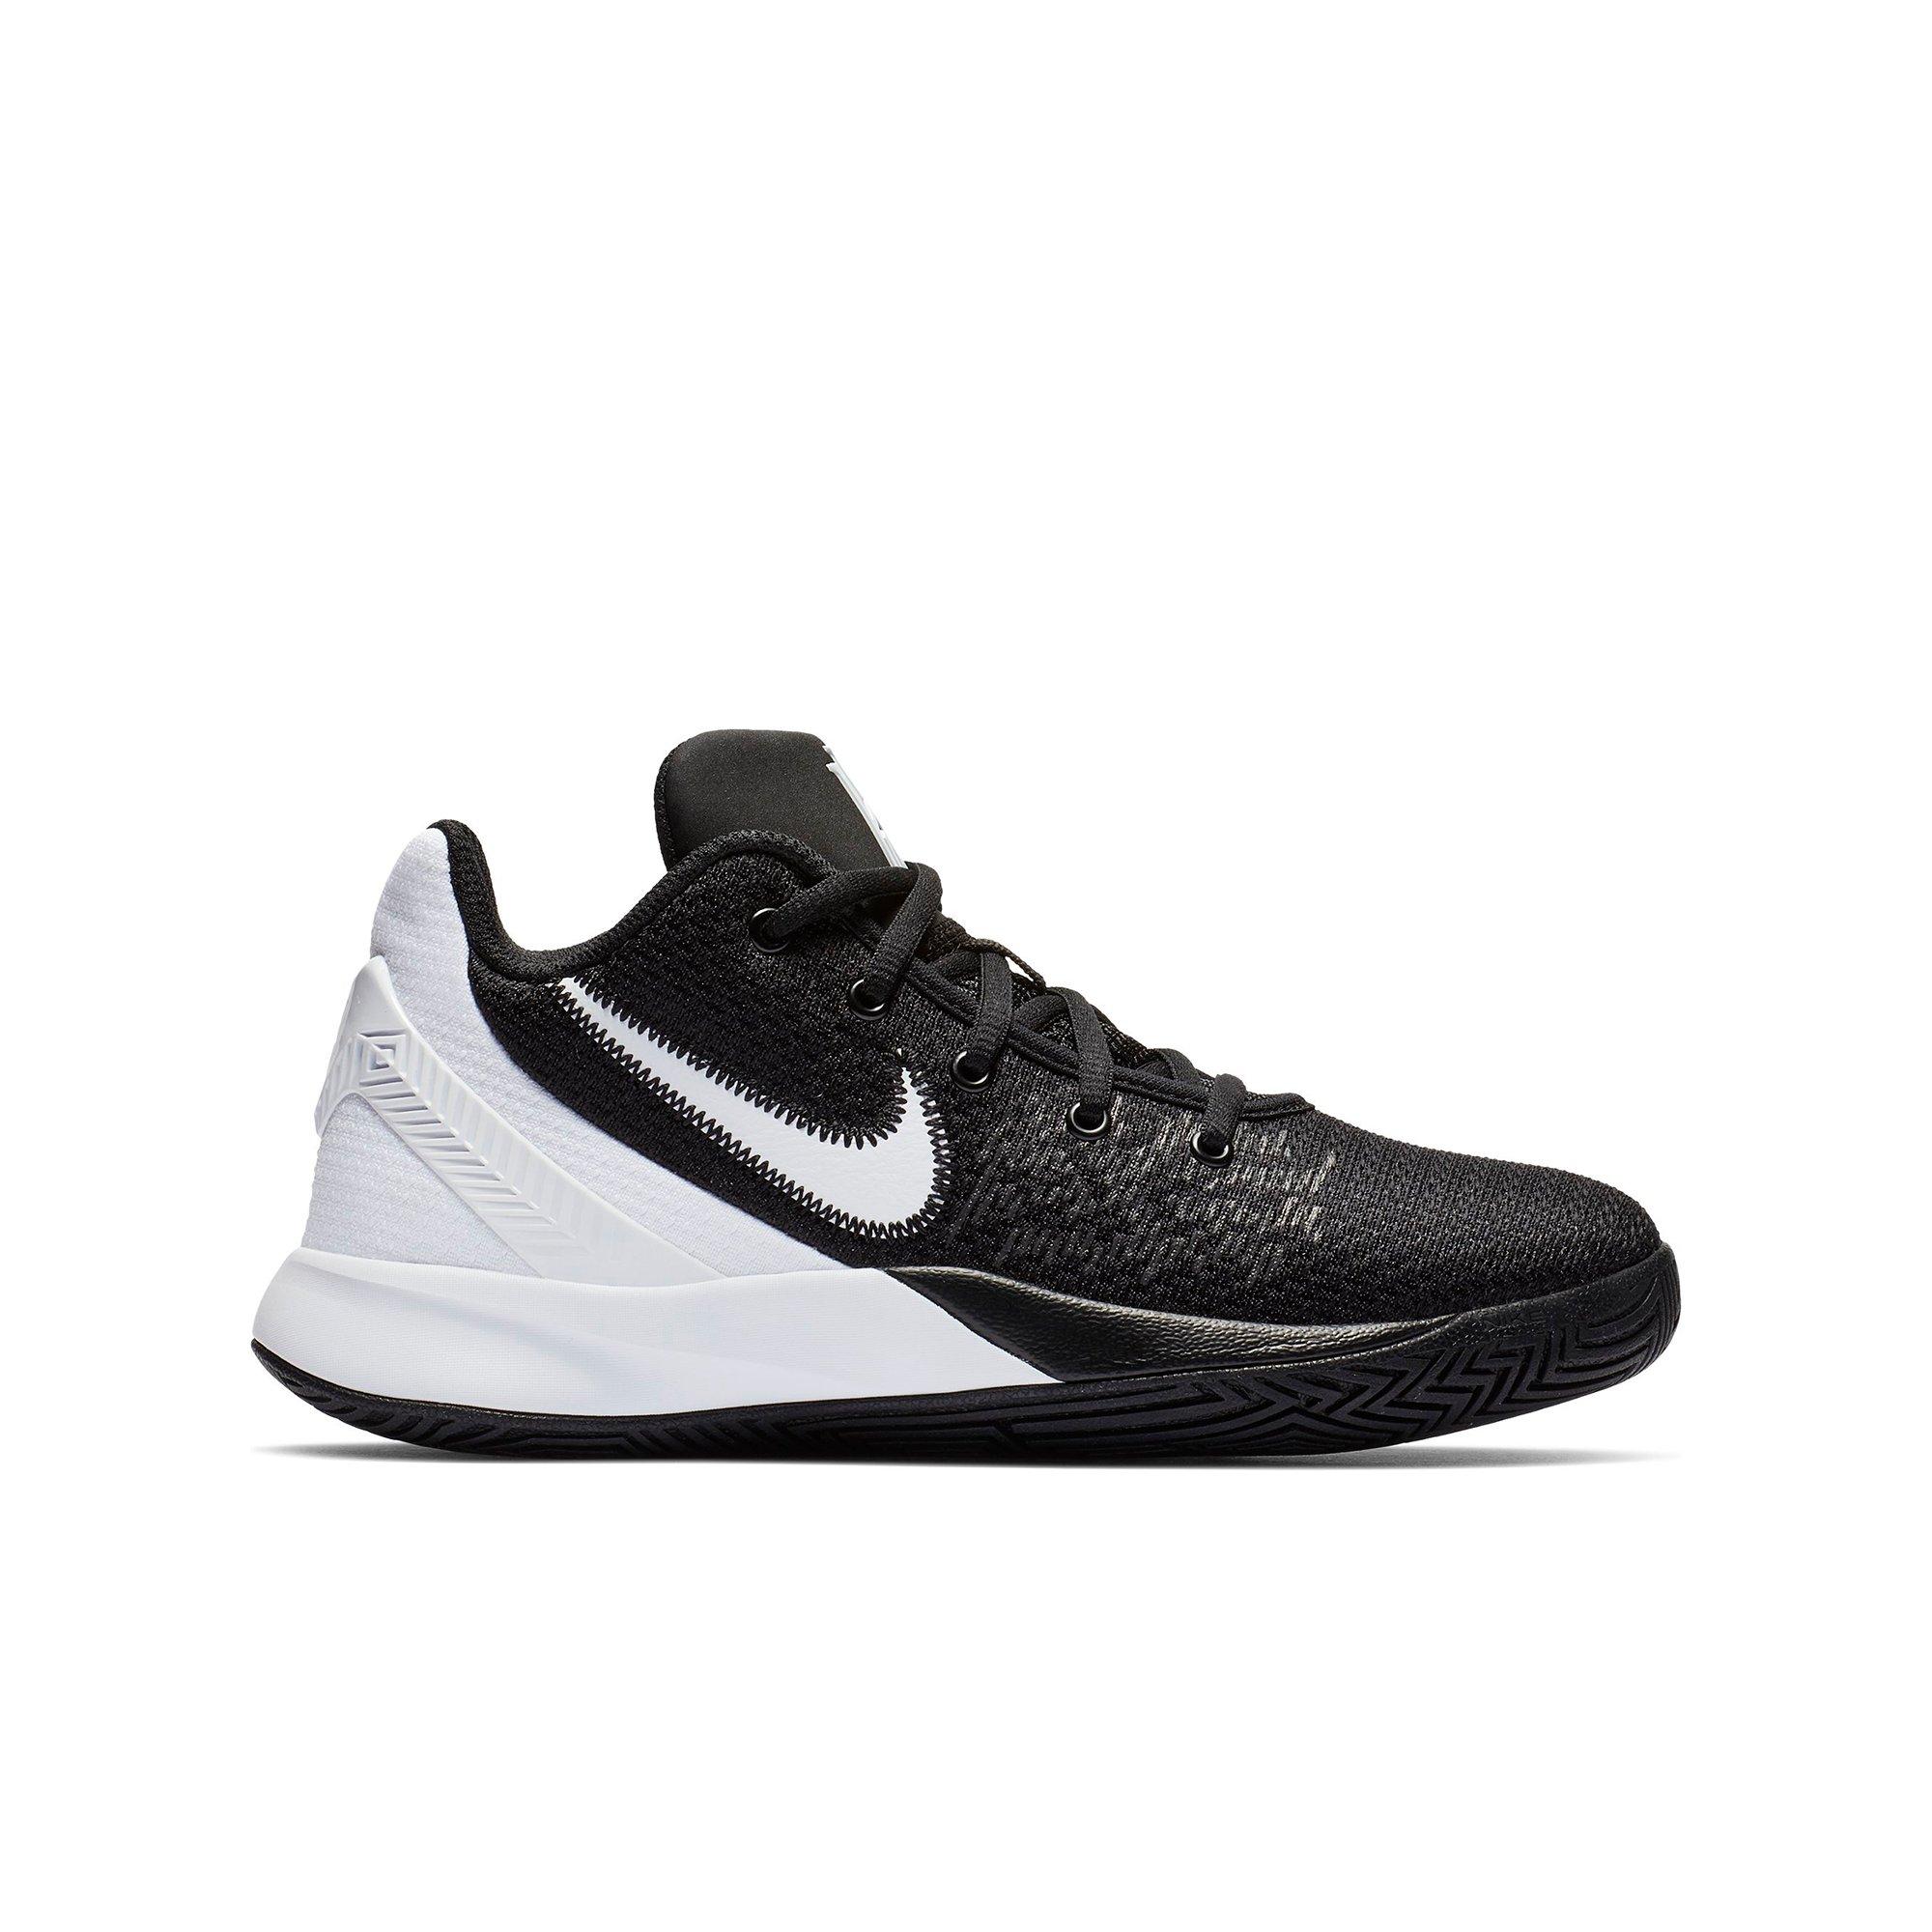 kyrie shoes black and white